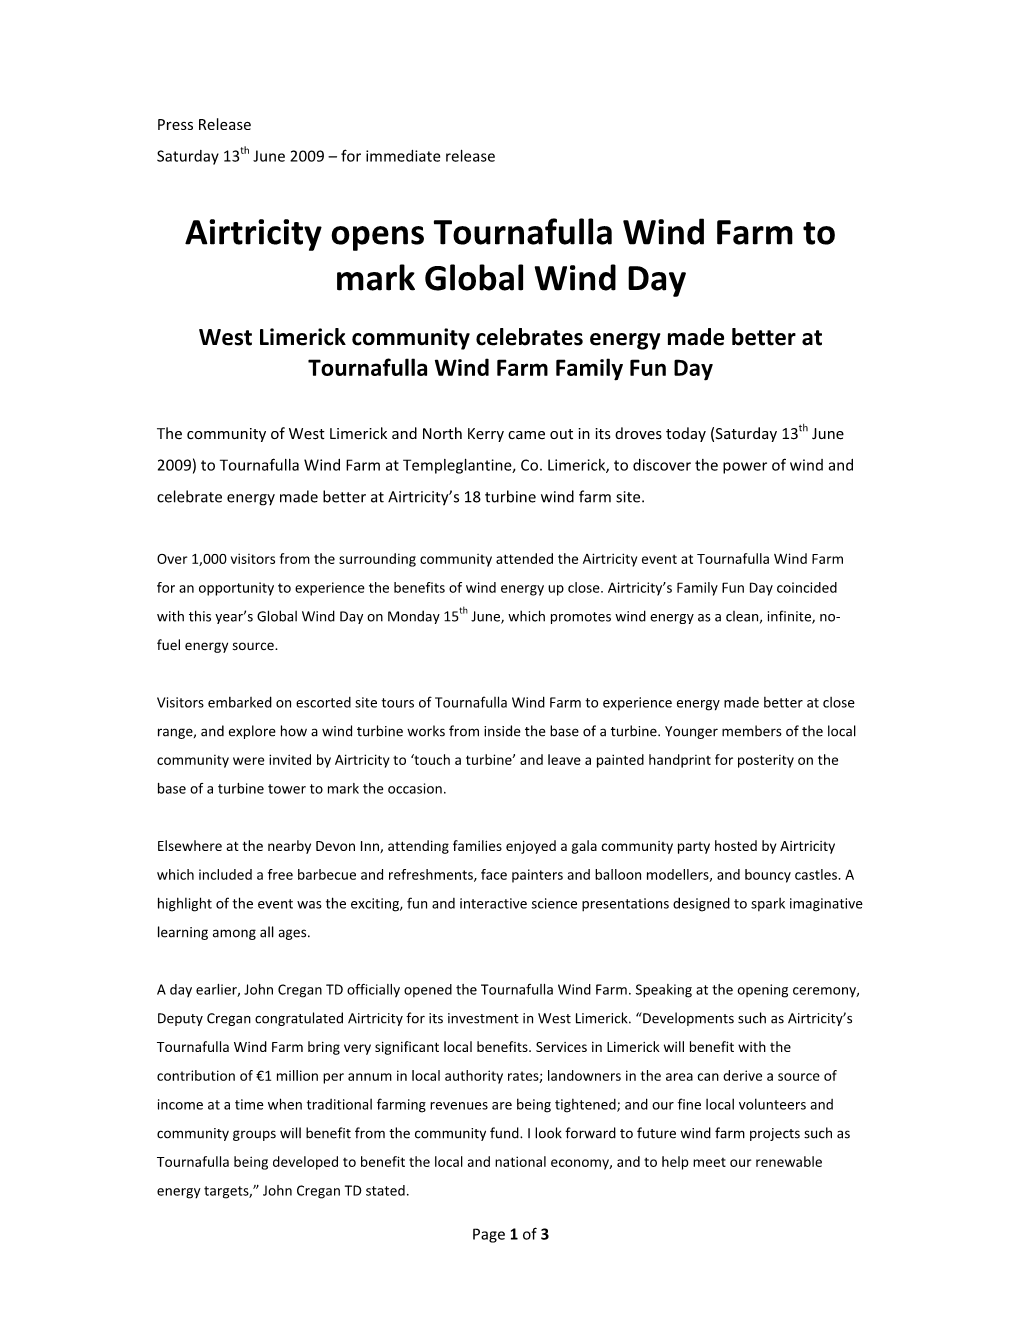 Airtricity Opens Tournafulla Wind Farm to Mark Global Wind Day